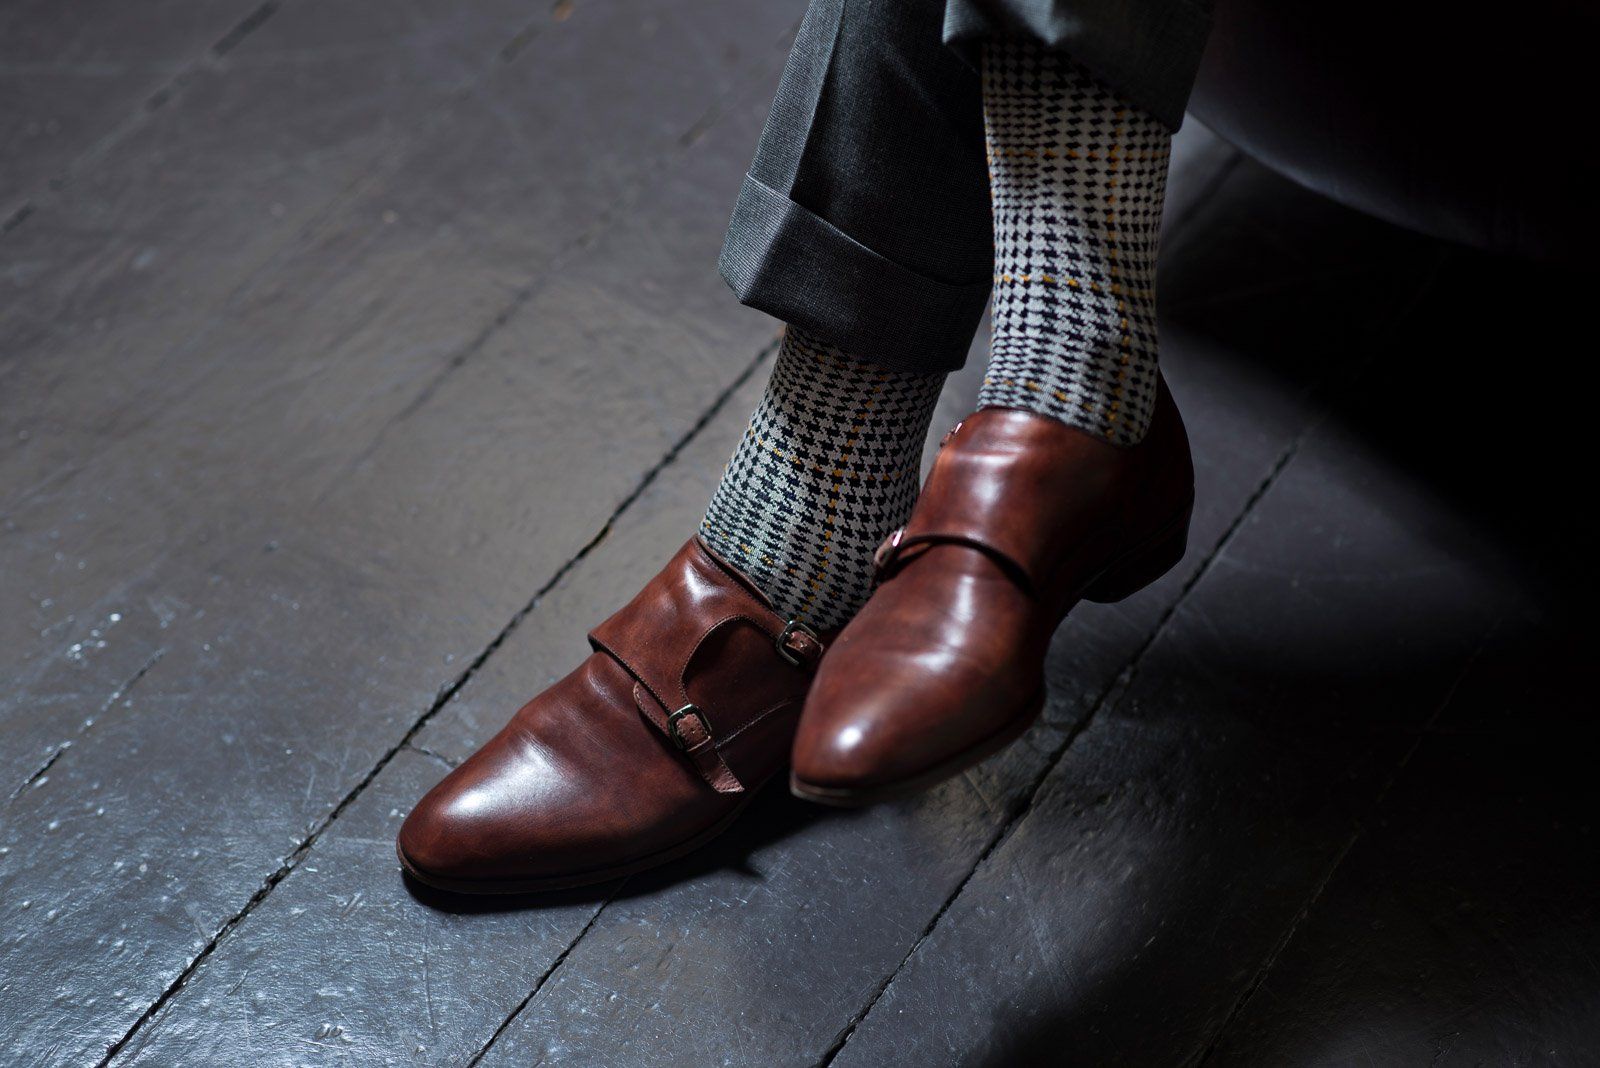 Good socks to inject character, Ottaway Style.